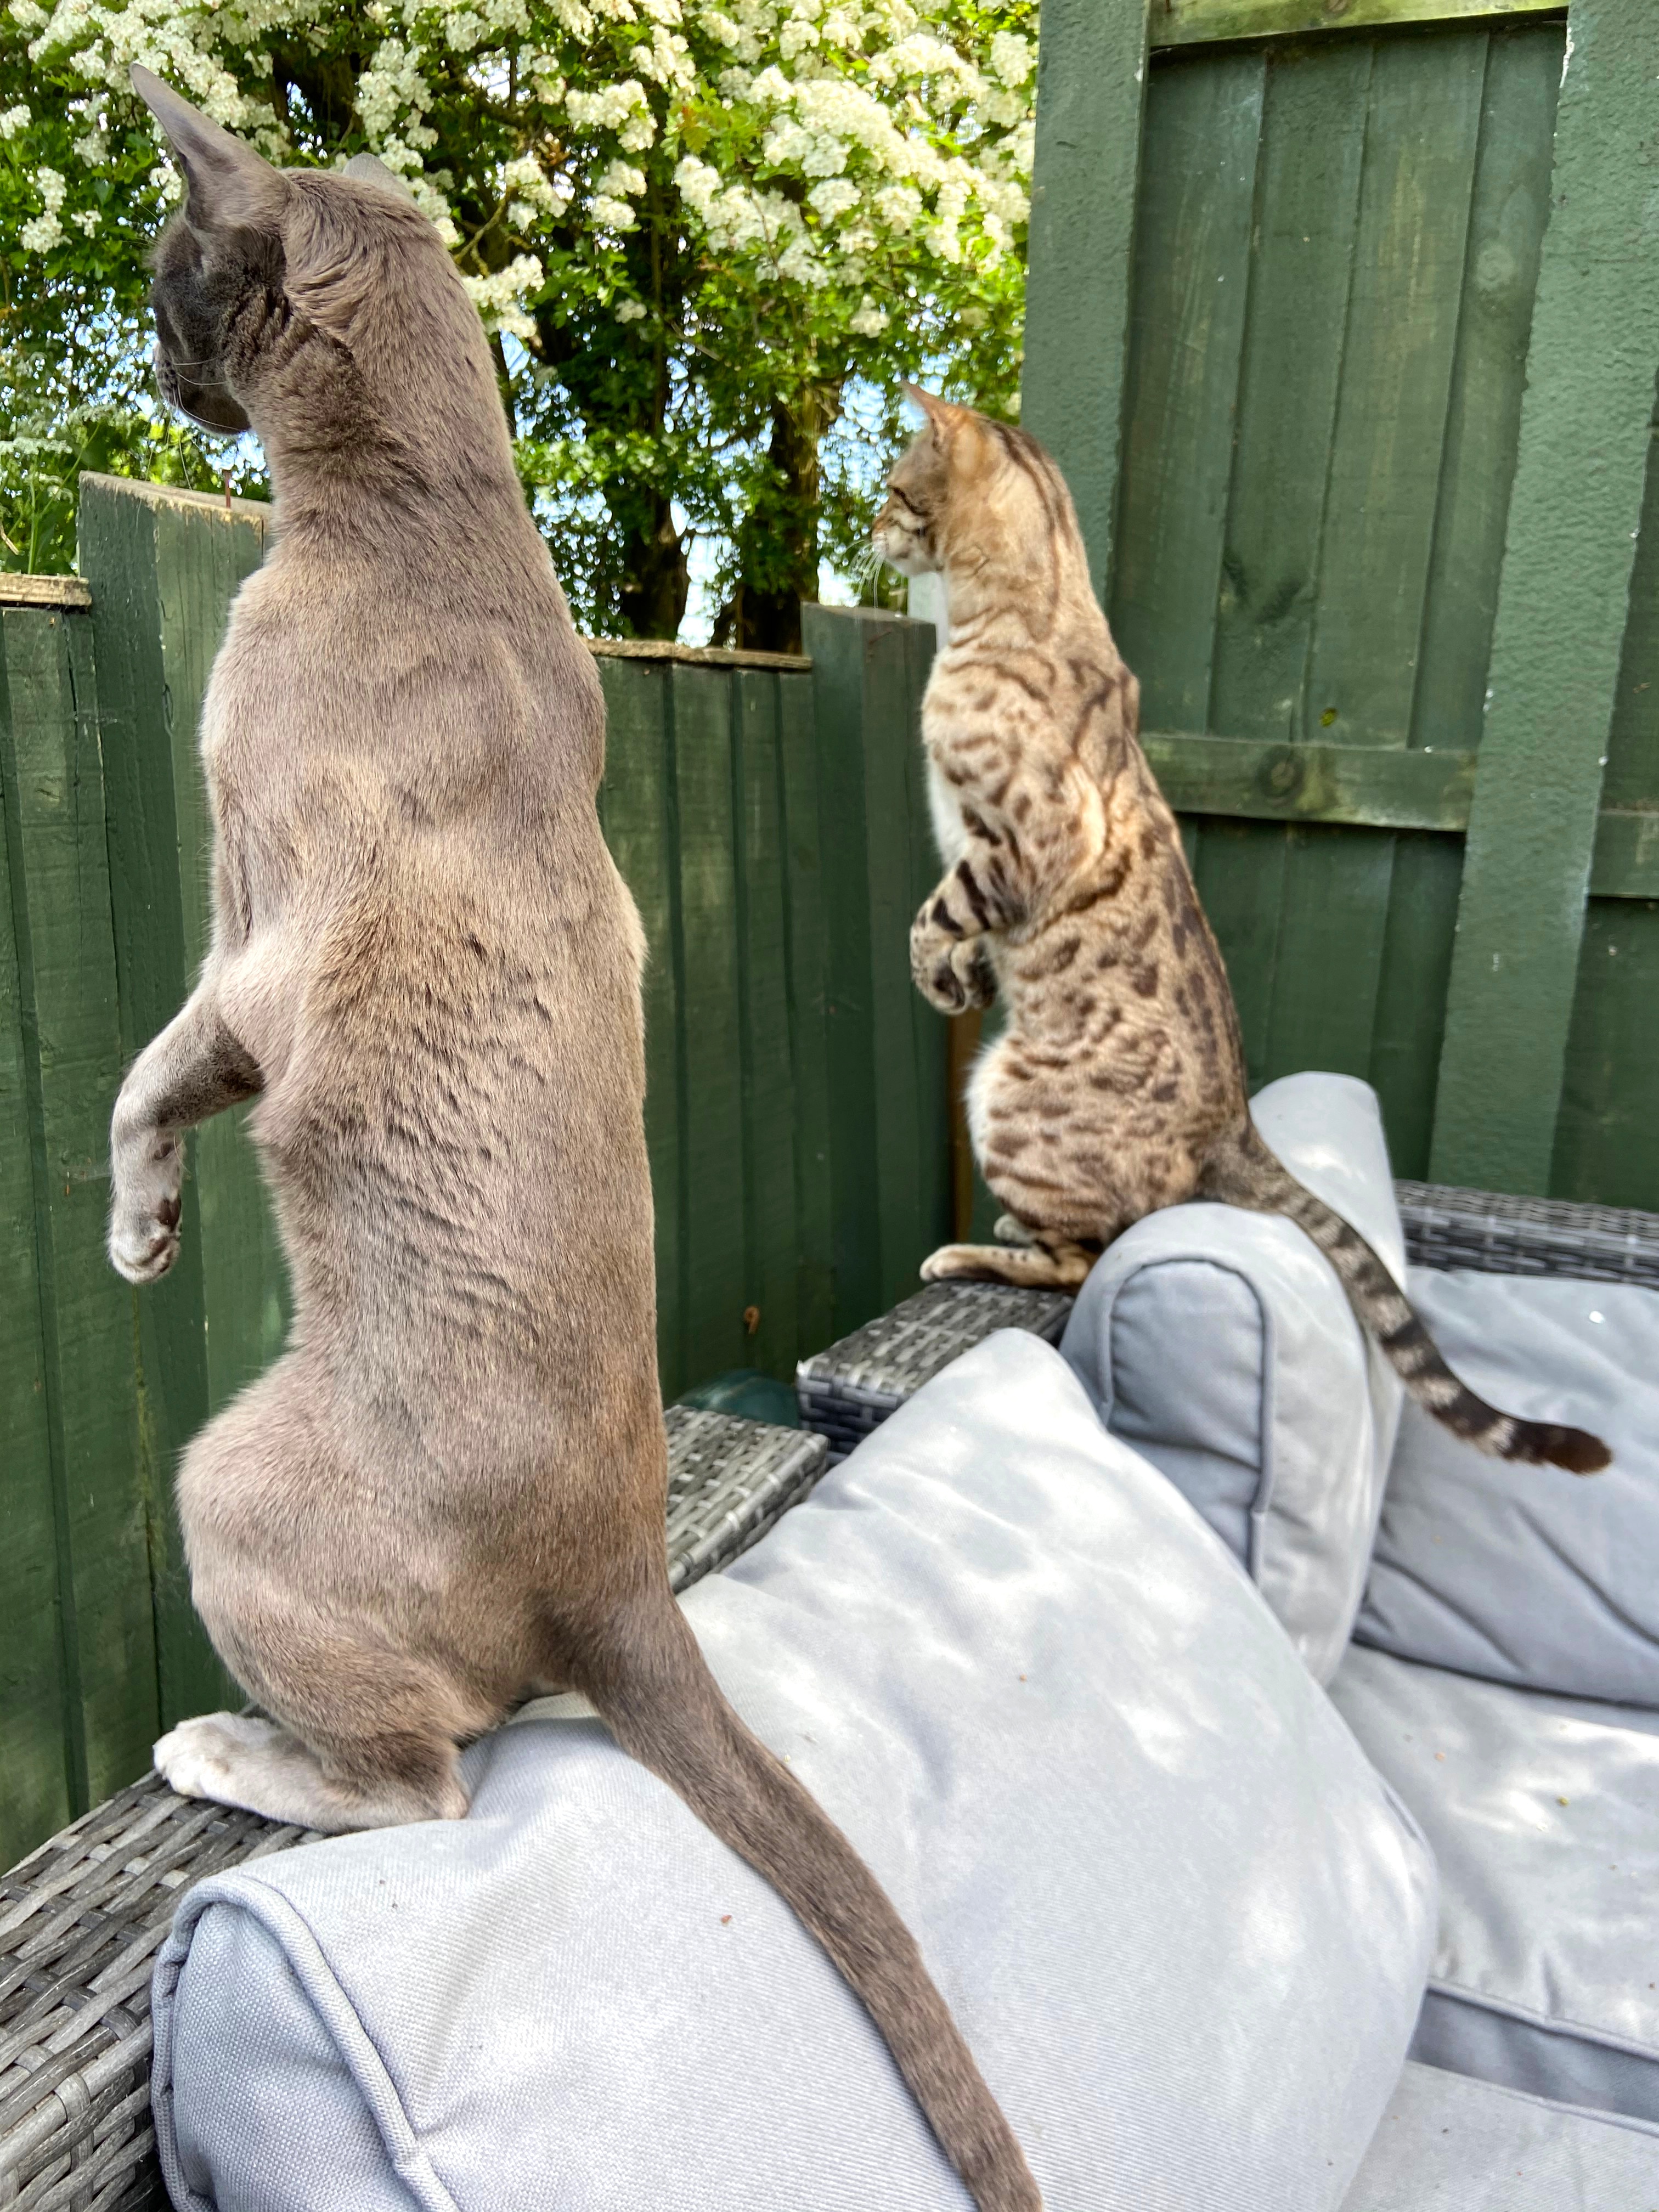 Two cats standing like meerkats trying to look over a fence in the backyard